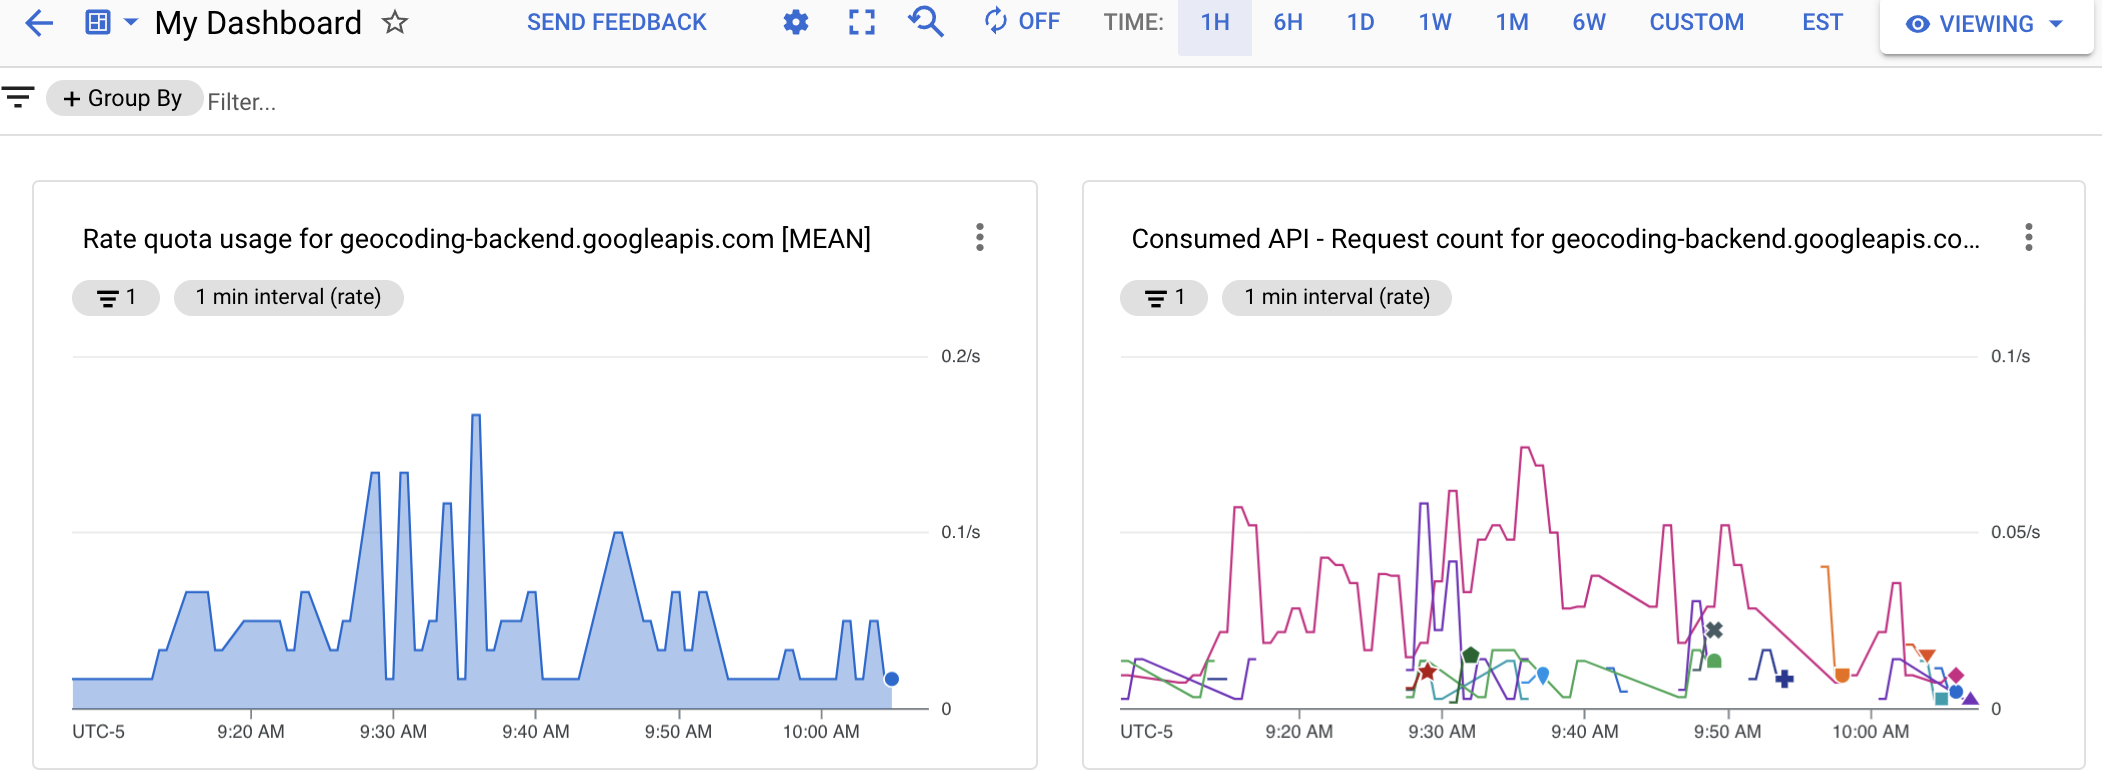 A screenshot of a custom dashboard, displaying two charts. The chart on the left is a quota chart,
  while the chart on the right is a chart of API usage. Both charts list time points on their
  horizontal axis.